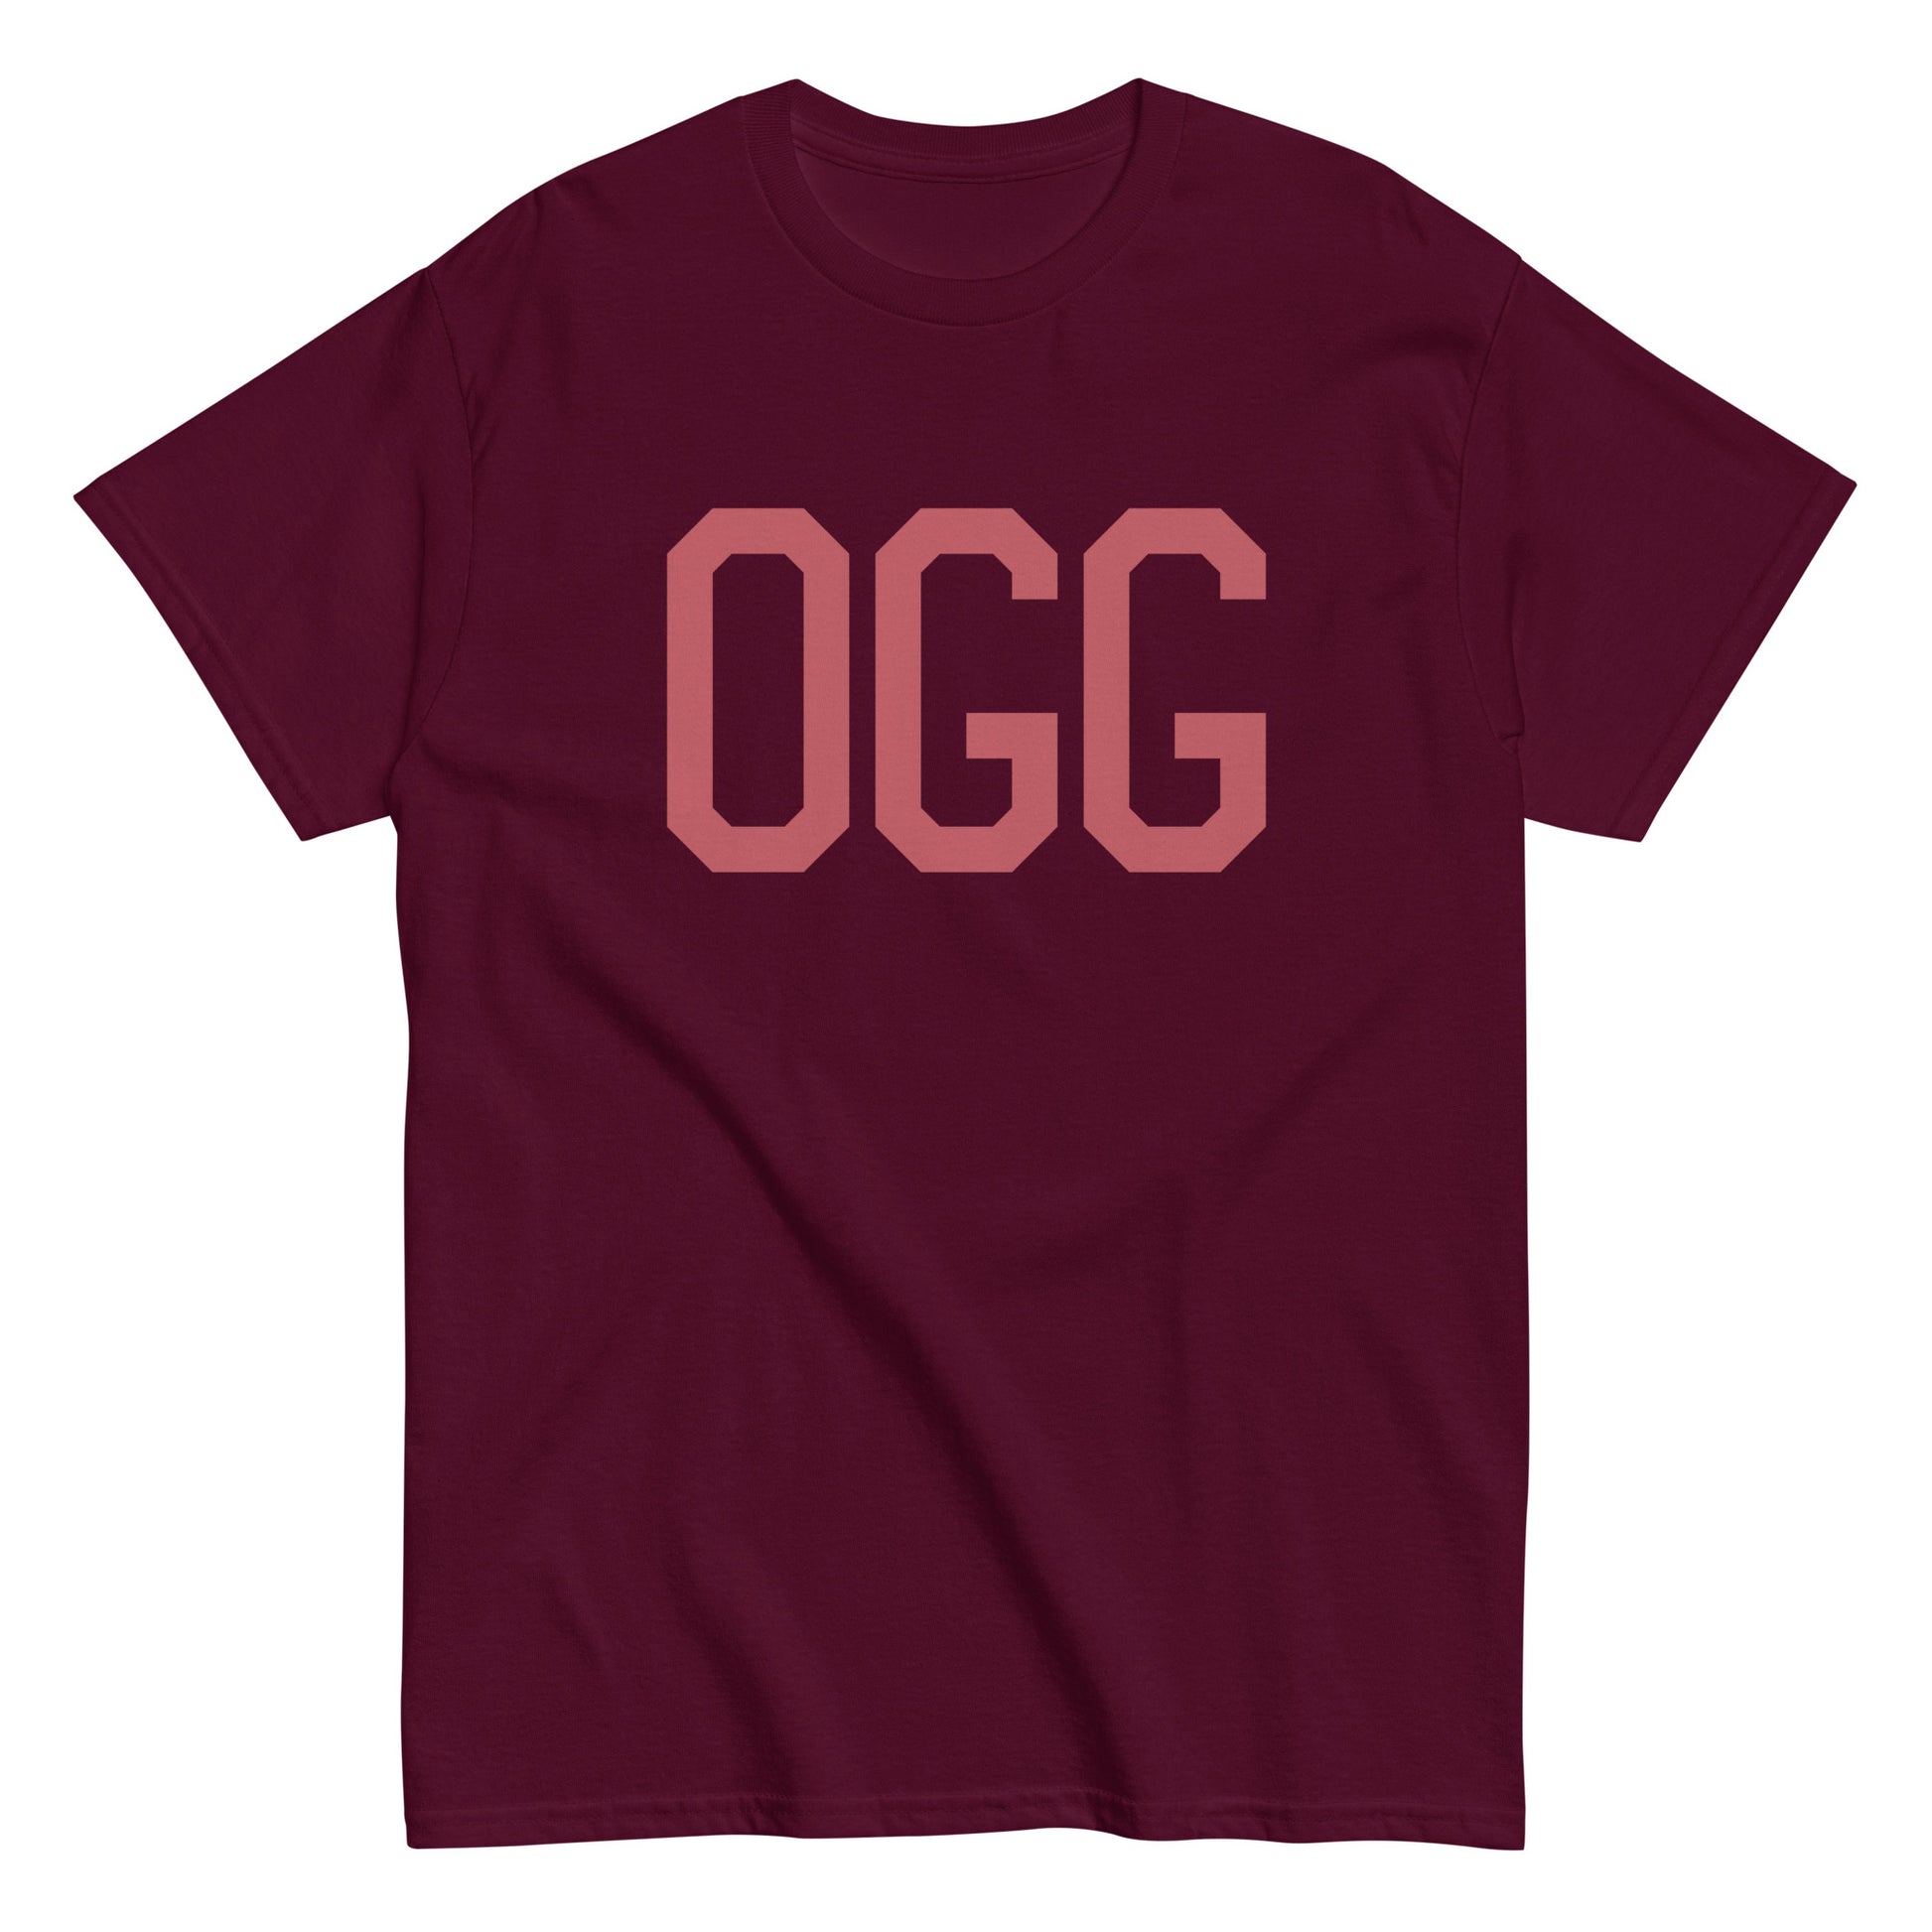 Aviation Enthusiast Men's Tee - Deep Pink Graphic • OGG Maui • YHM Designs - Image 01